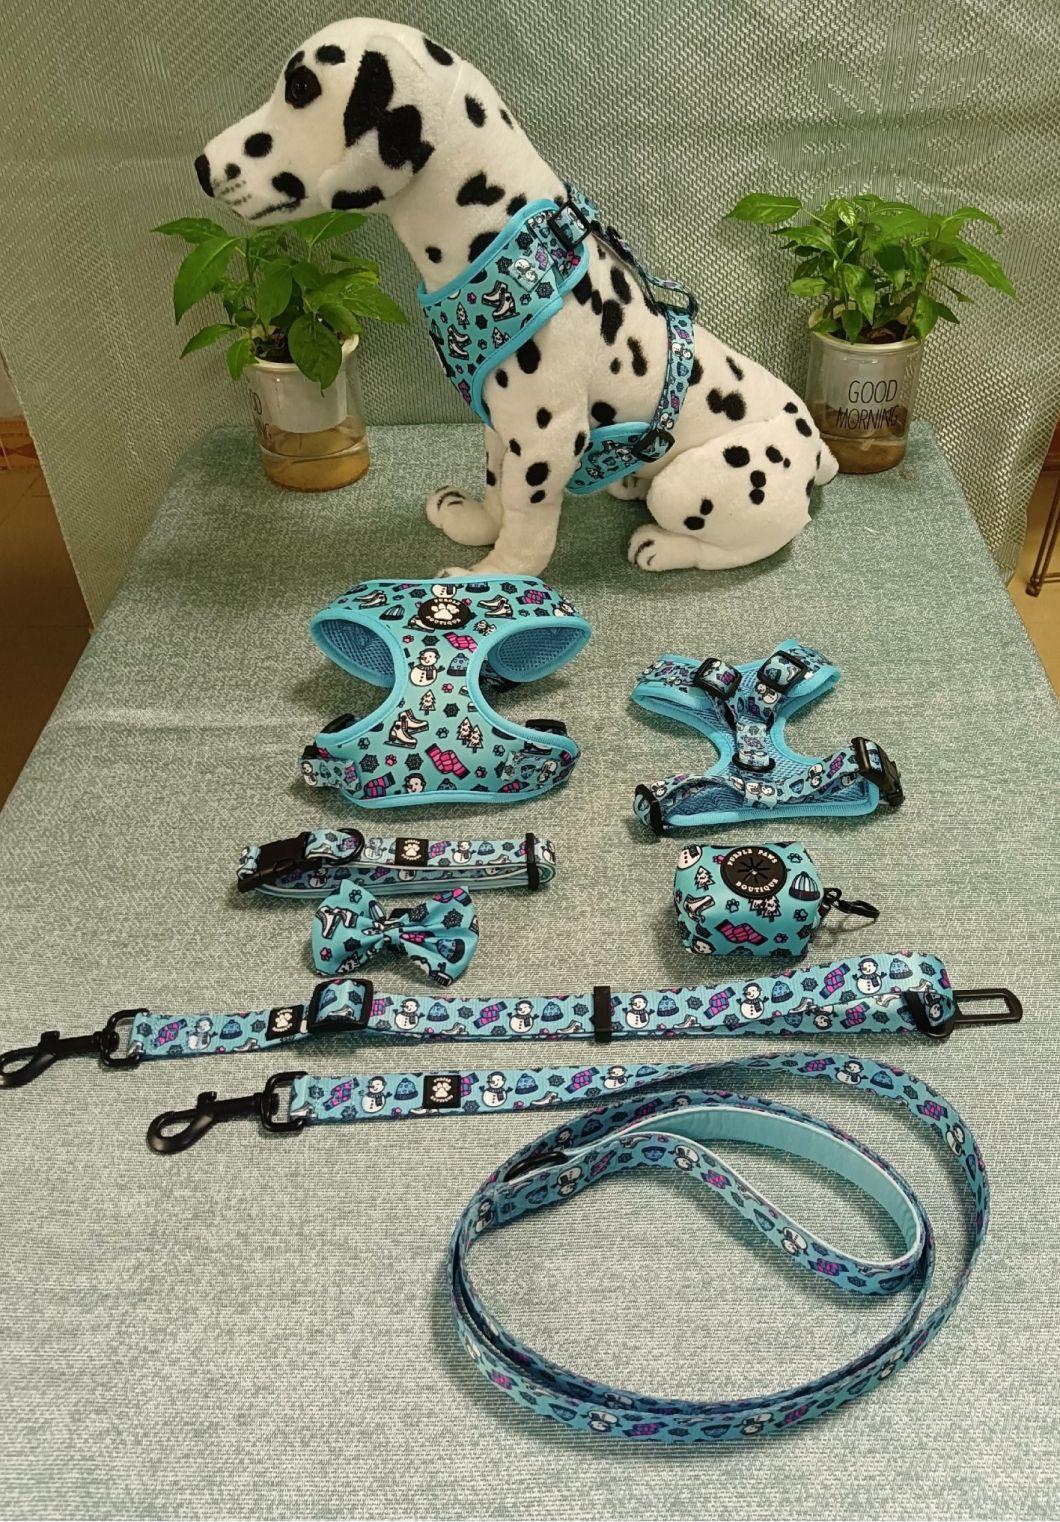 All Kinds of Design Full Sets Dog/Pets Harness Factory Price/Harness for Dog/Xx Small Dog Harness/Dog Collars